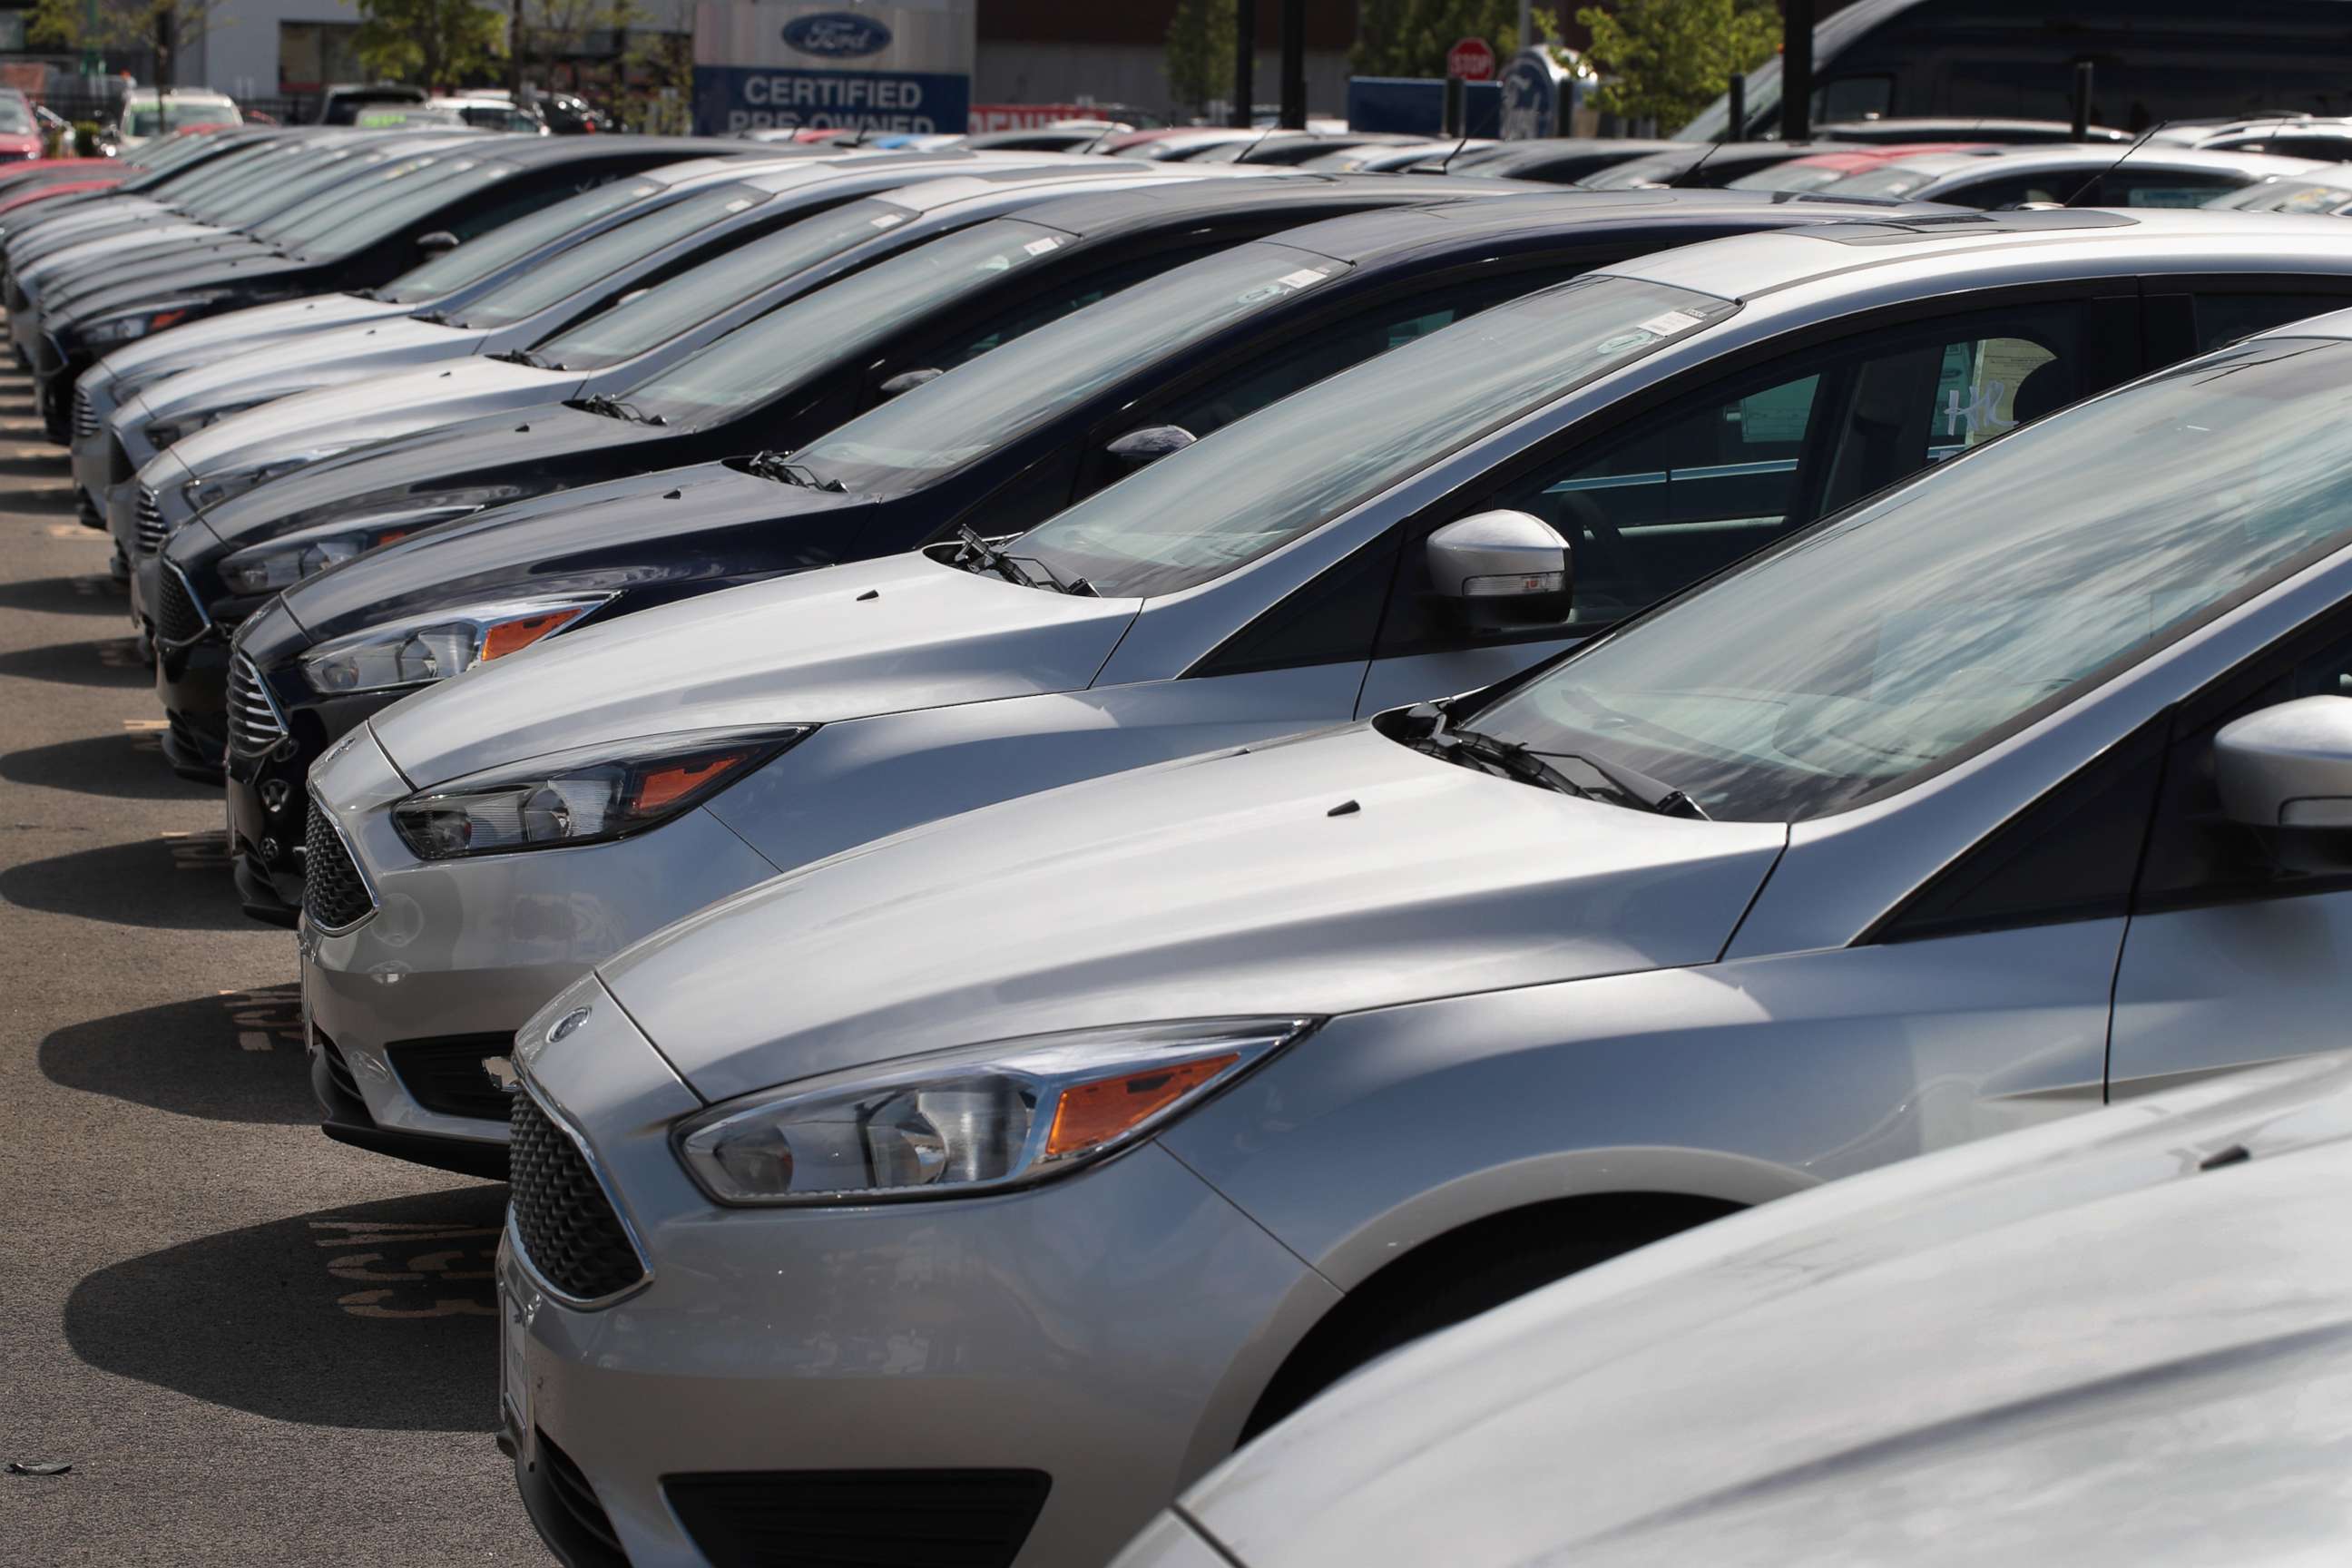 PHOTO: Ford Focus compact cars for sale at a dealership in Chicago, June 20, 2017.